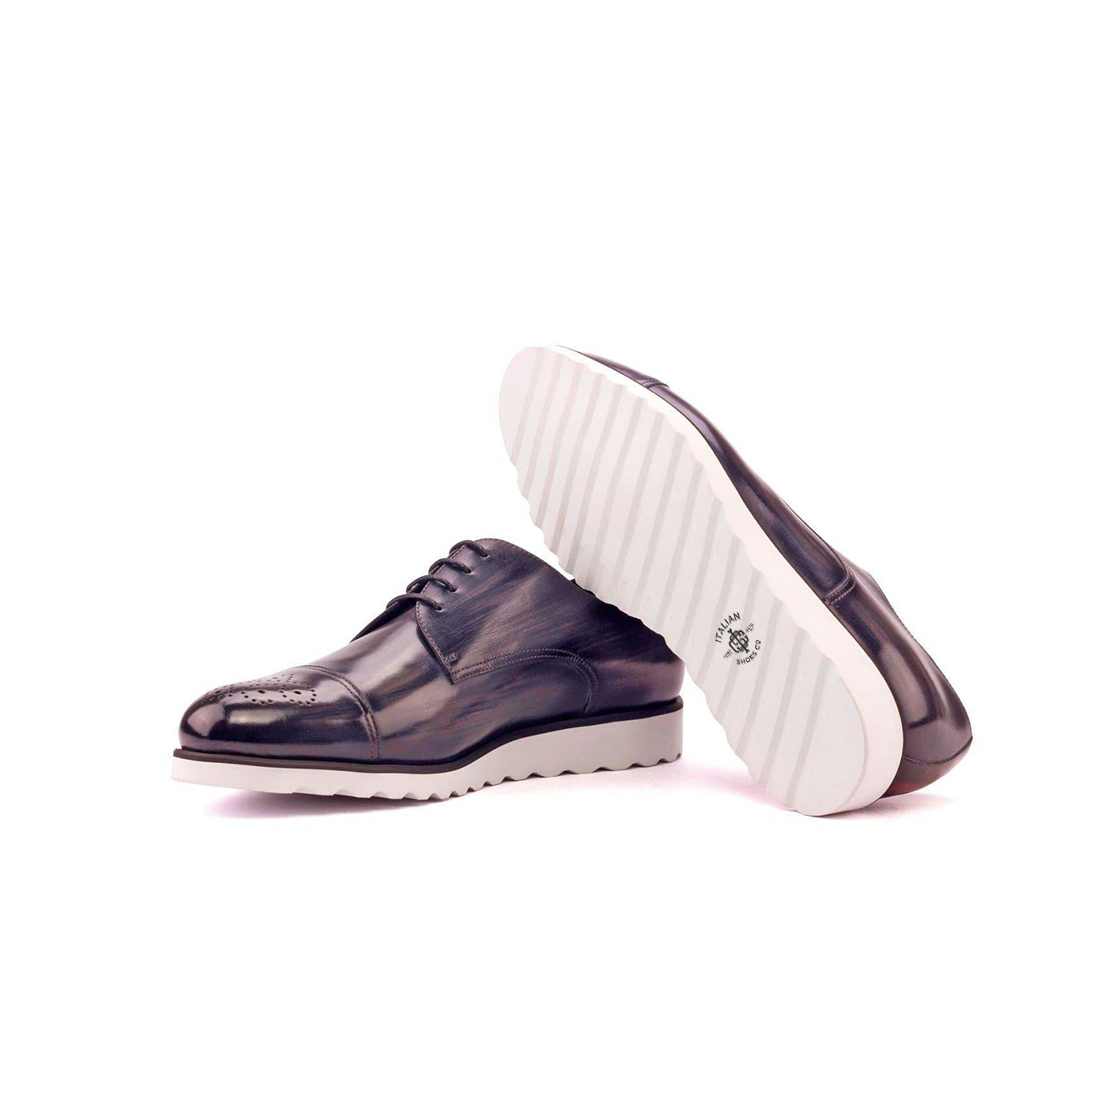 Moonlight Mirage Derby Shoes